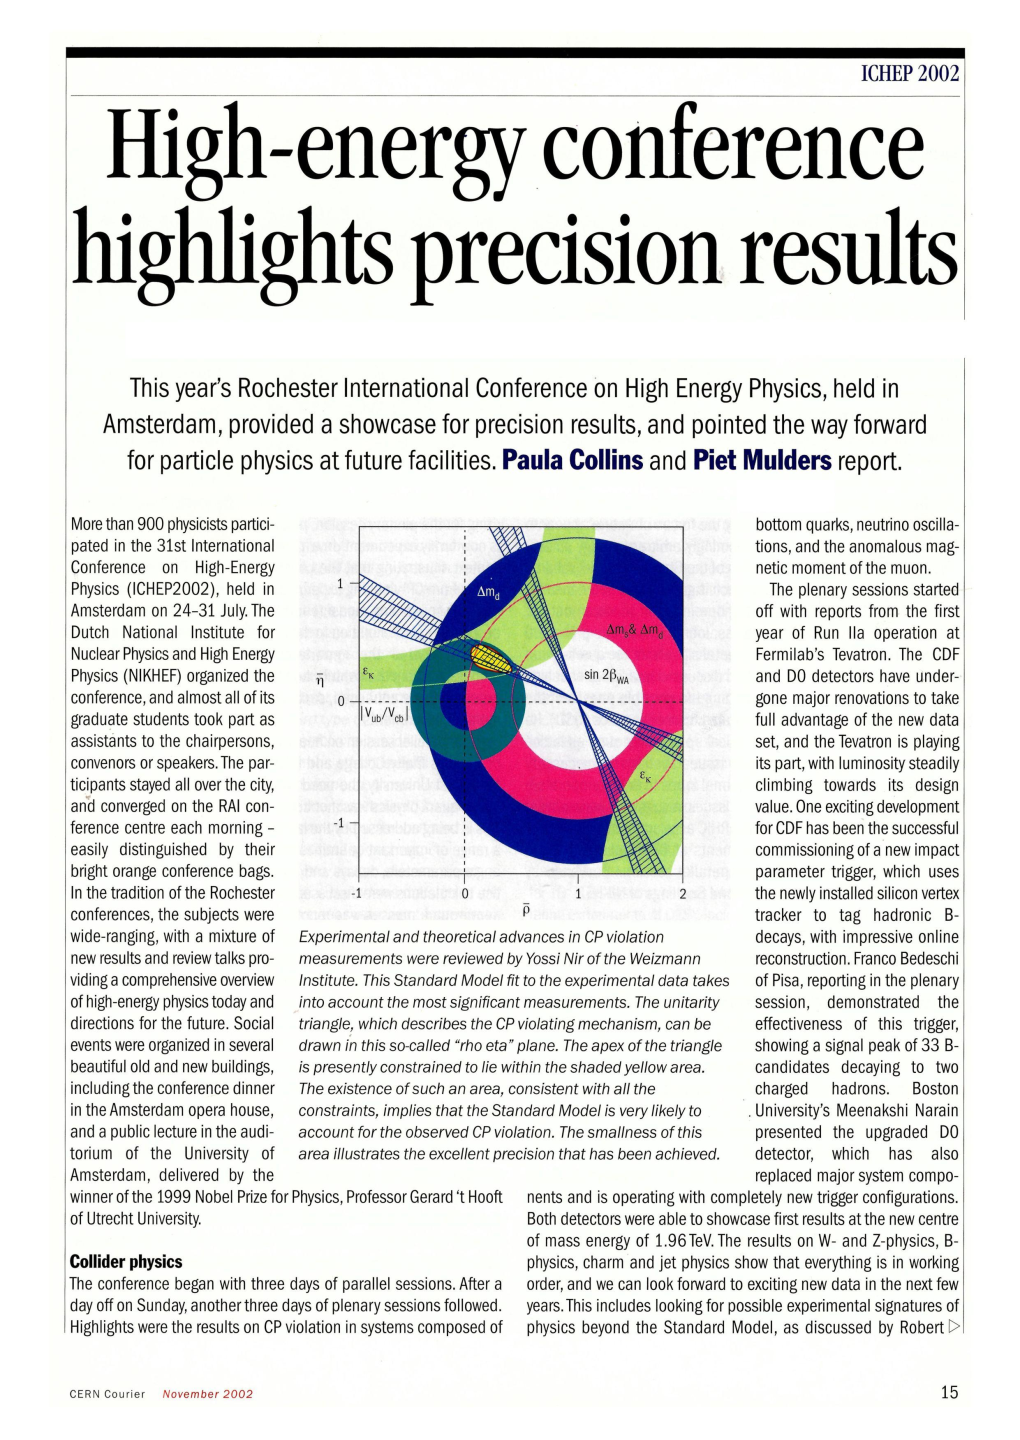 High-Energy Conference Highlights Precision Results